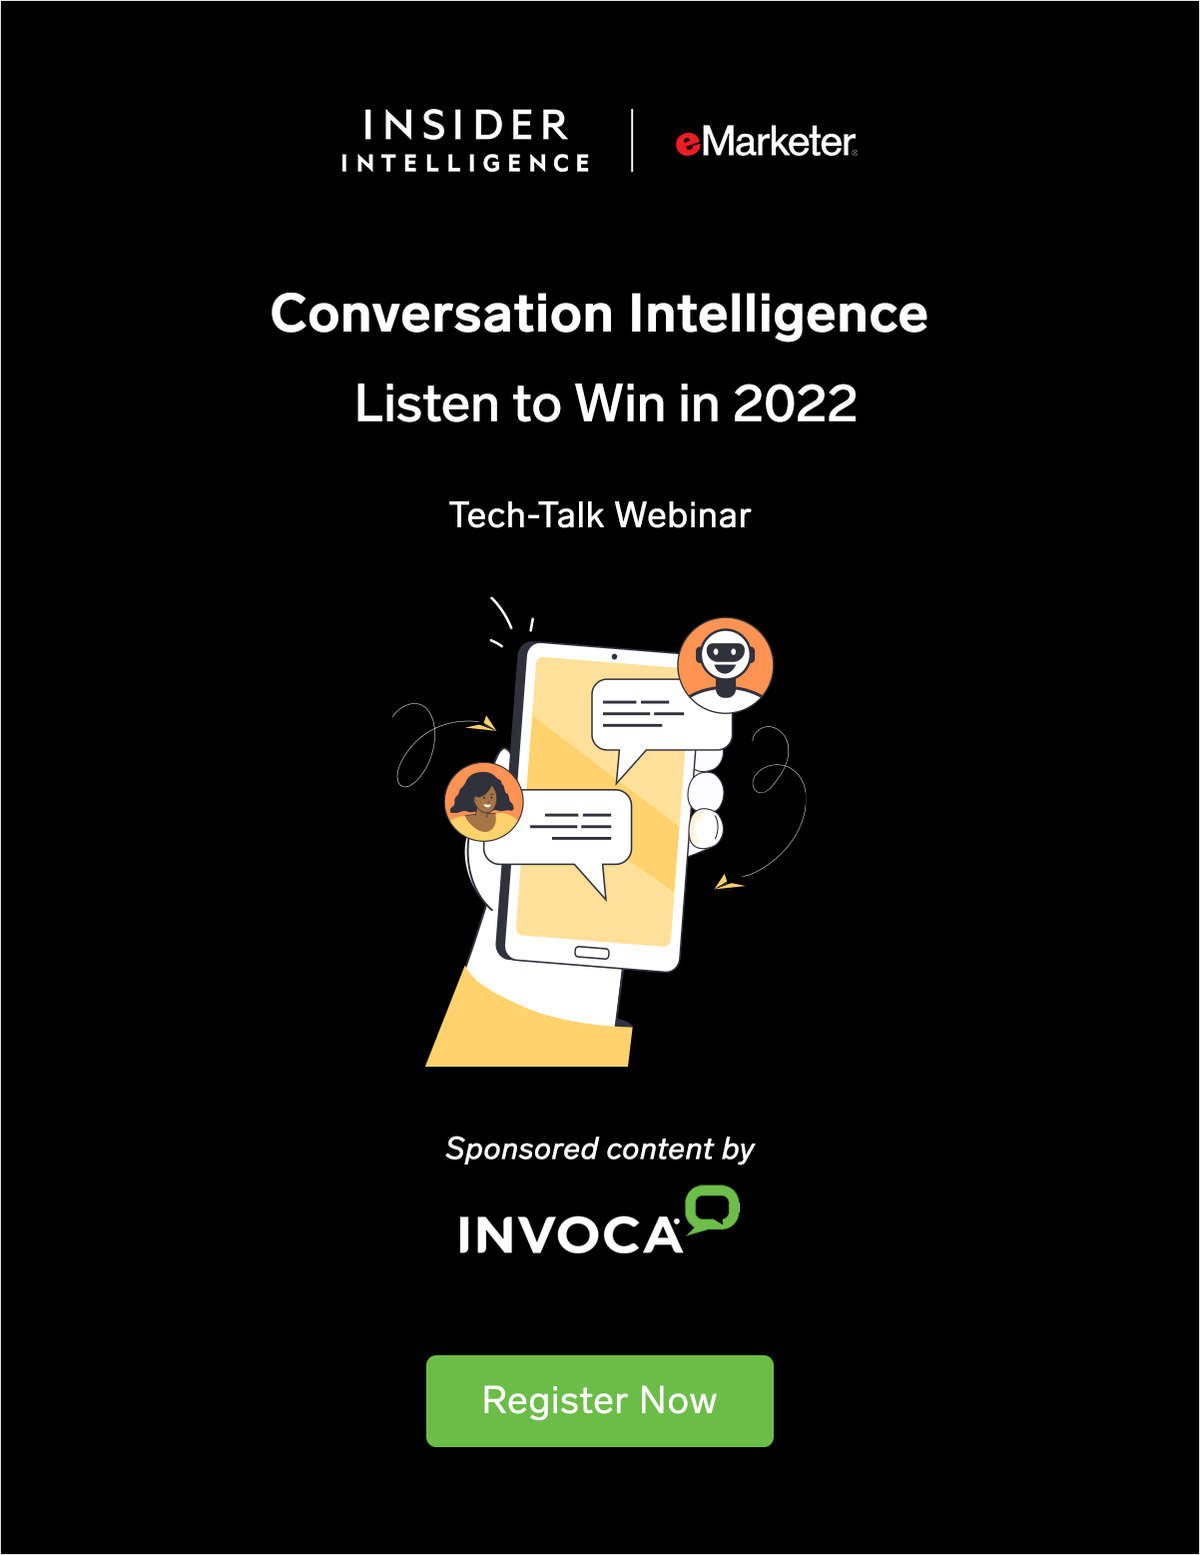 How Marketers Are Using Conversation Intelligence and AI Today to Win in 2022